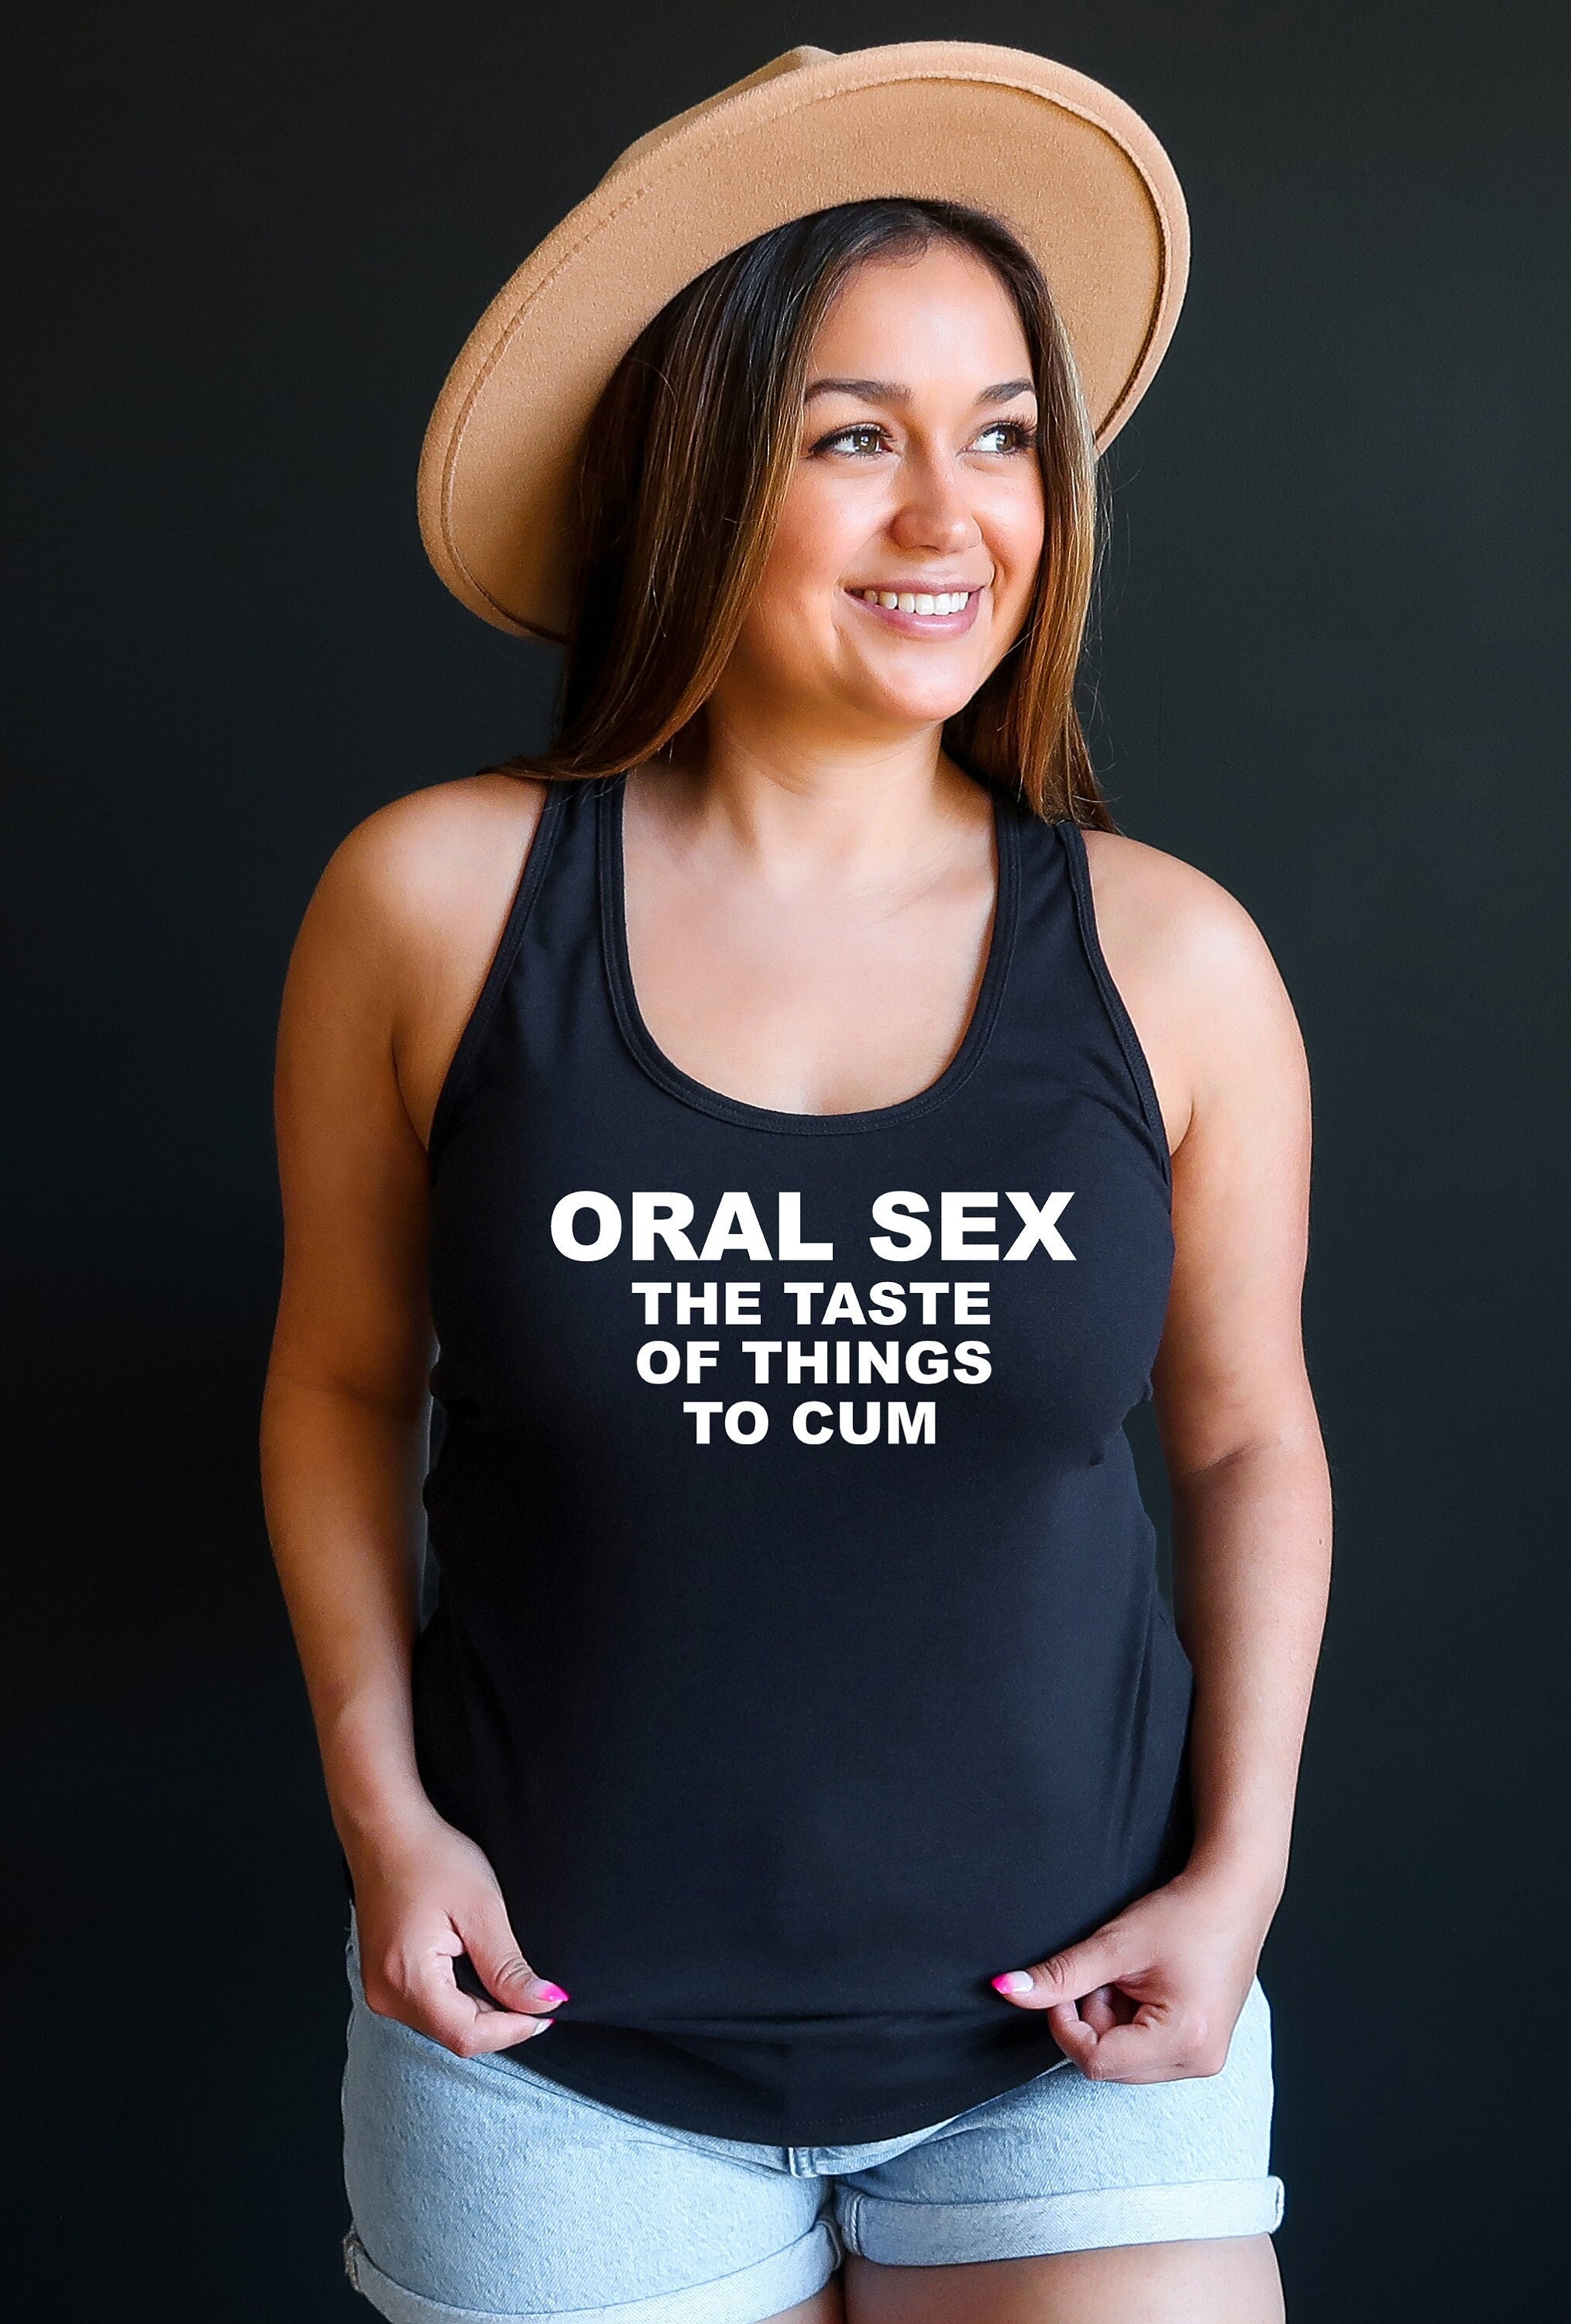 Oral Sex Shirt / Oral Sex the Taste of Things to Cum / BJ pic image